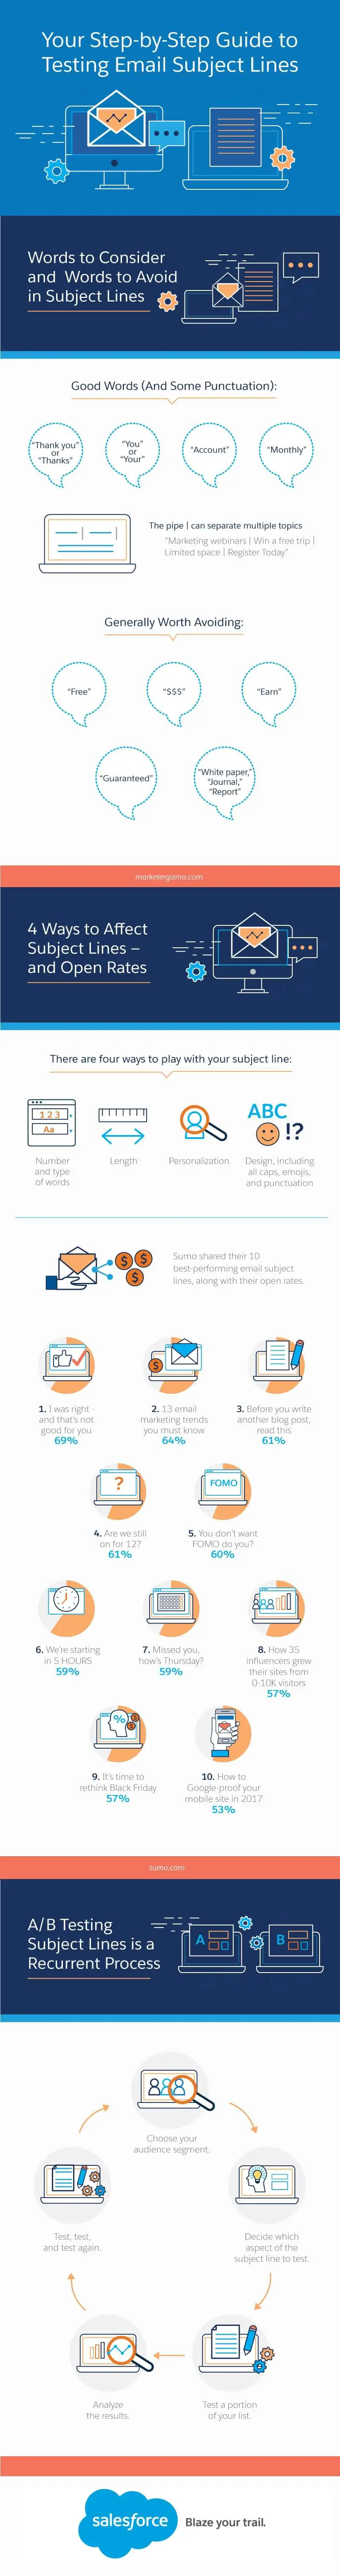 your-step-by-step-guide-to-testing-email-subject-lines-infographic.jpg